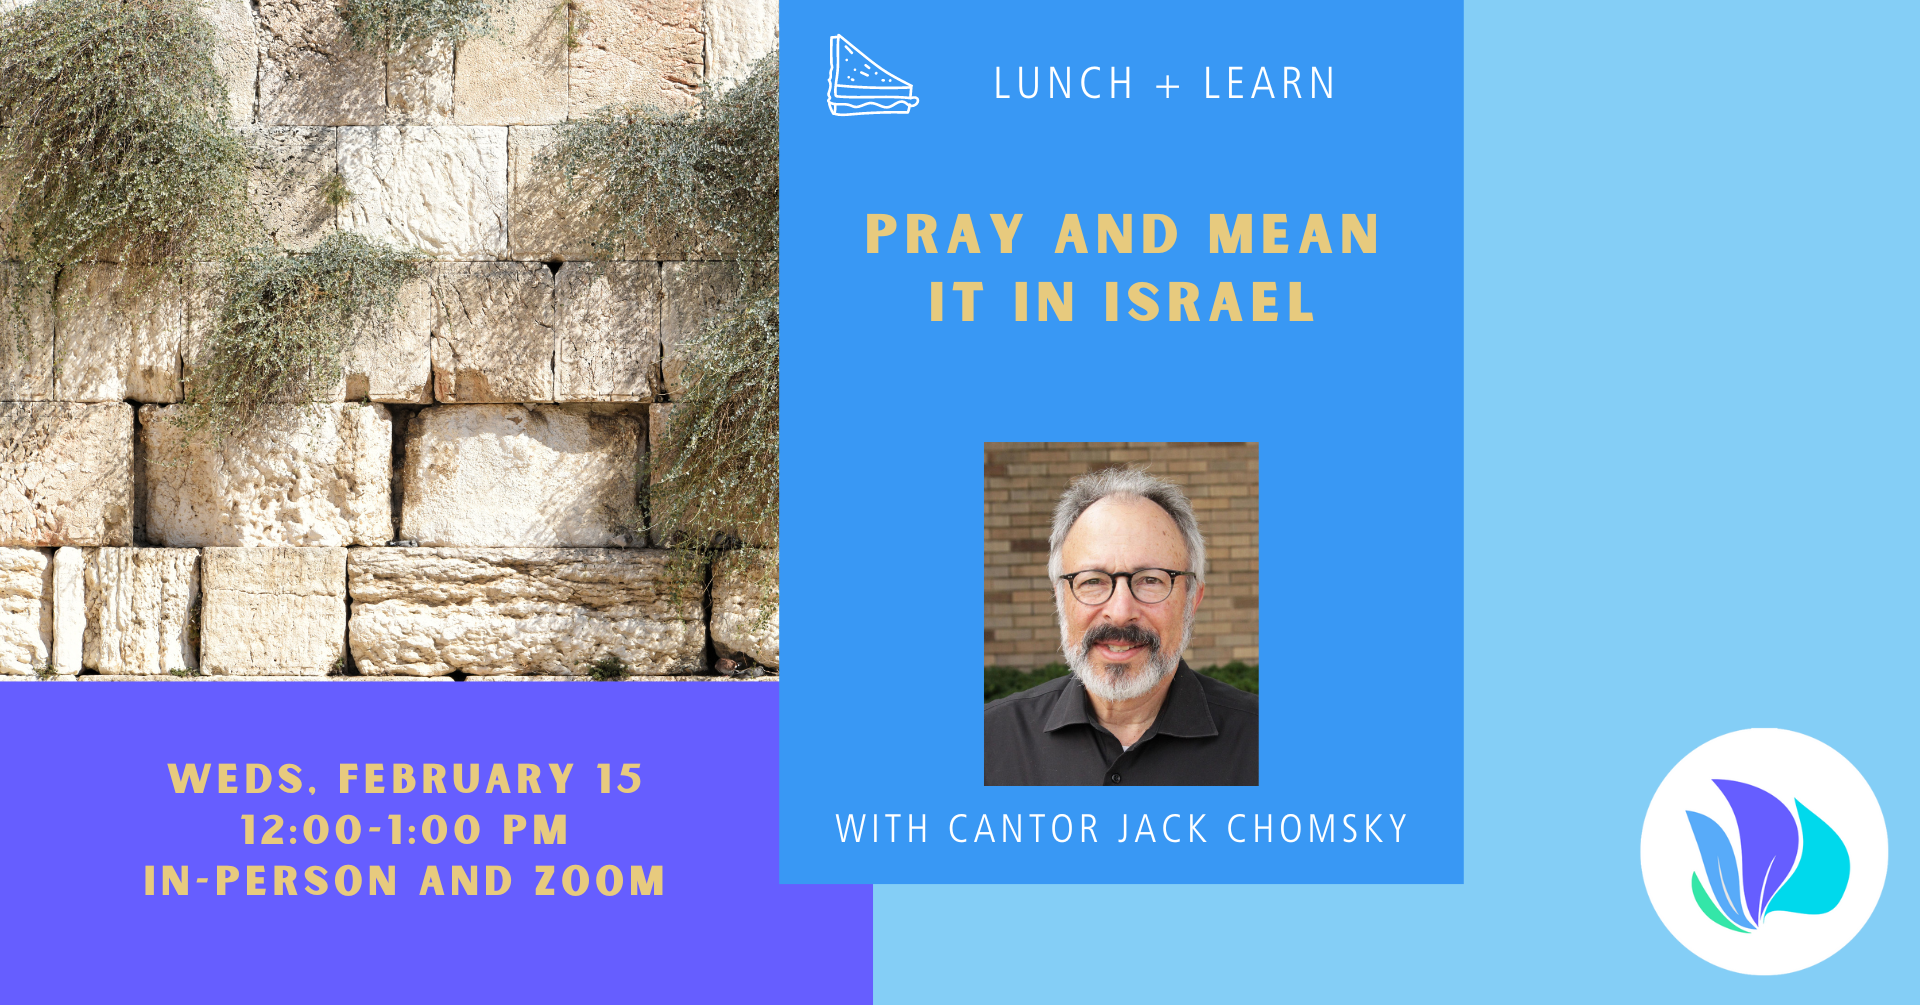 [Lunch & Learn] Pray and Mean It in Israel